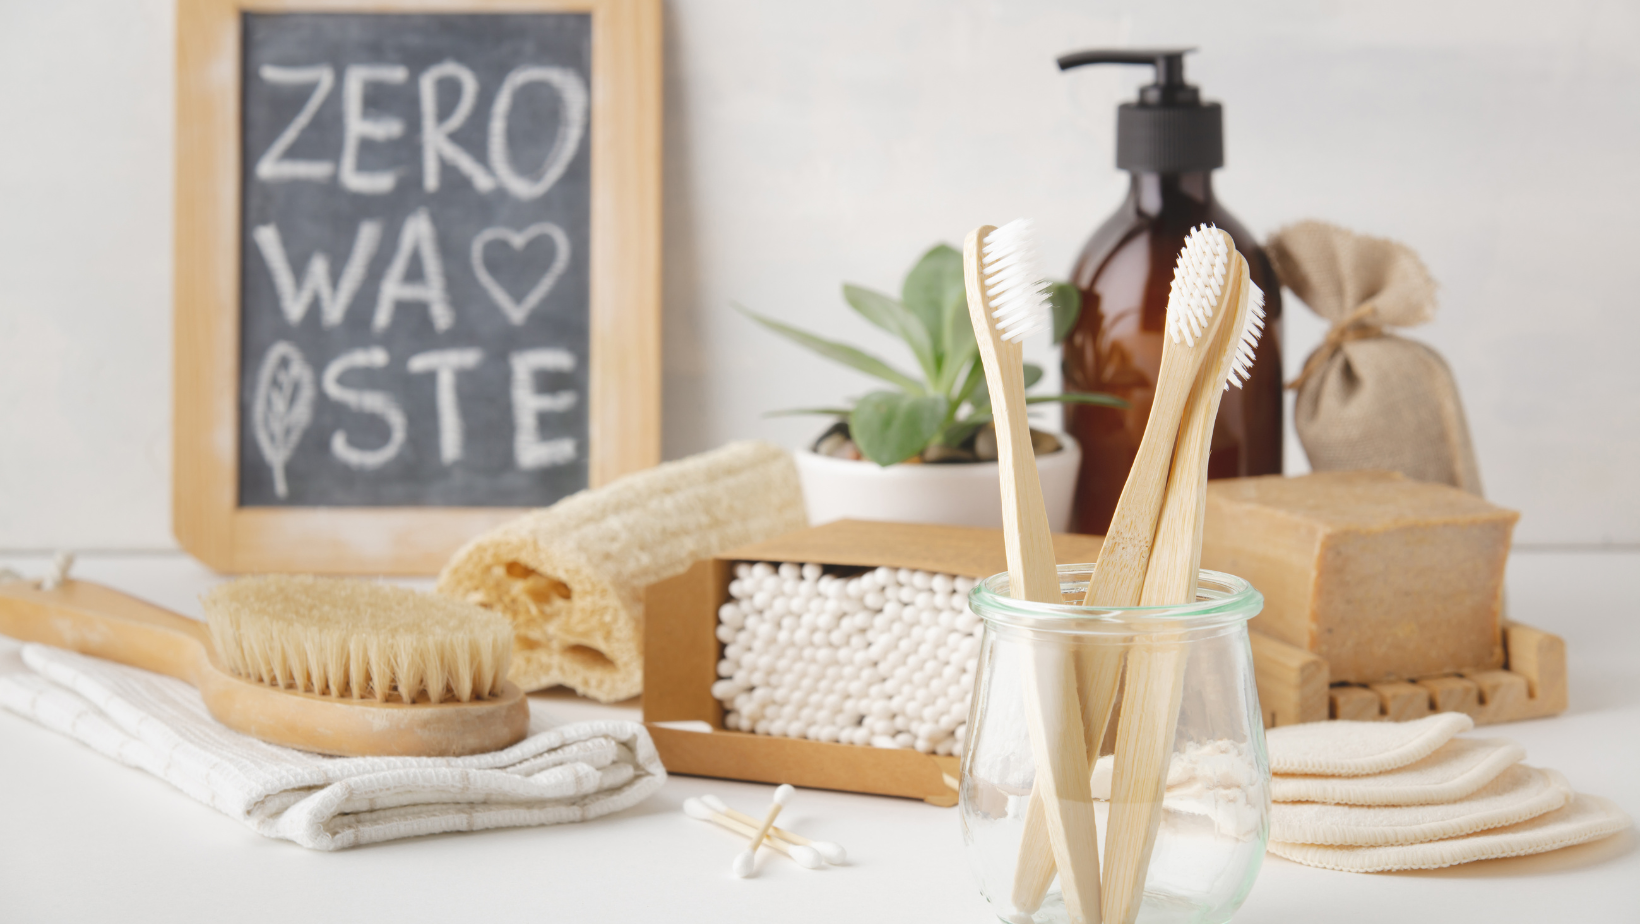 Zero waste written on blackboard with bamboo hair brush, toothbrush, cotton buds and other bathroom products